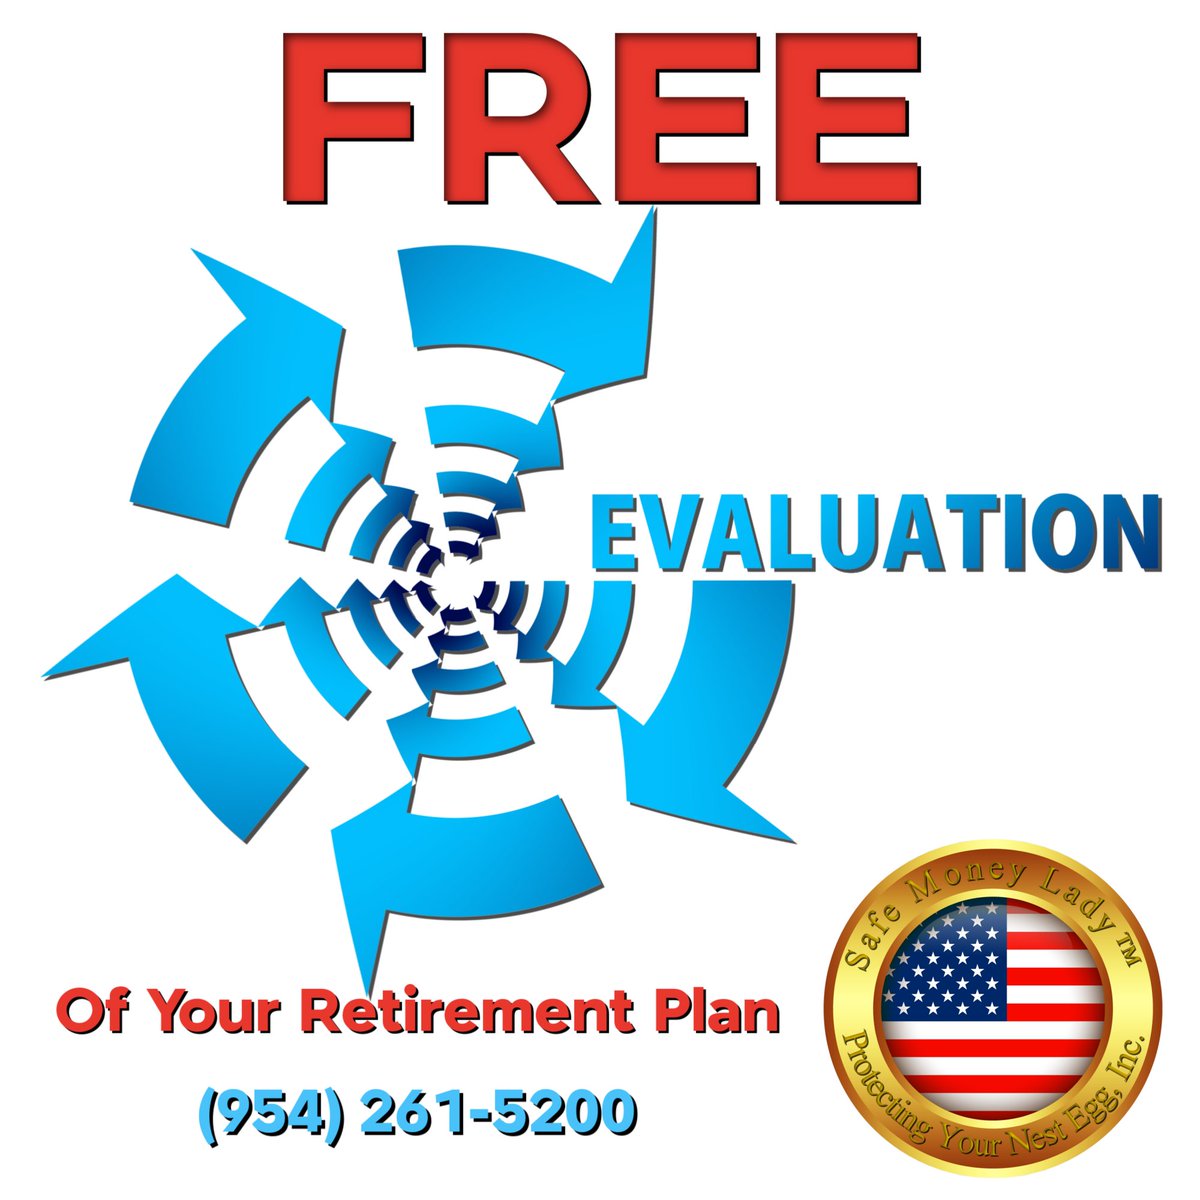 🔍 Seeking clarity on your retirement plan? 🚀 Take advantage of our FREE evaluation offer! 🌟 Call (954) 261-5200, or email us through the website to get started. 
Learn more: safemoneylady.org/services
#RetirementPlanning #RetirementPlan #SafeMoneyLady #RetirementGoals